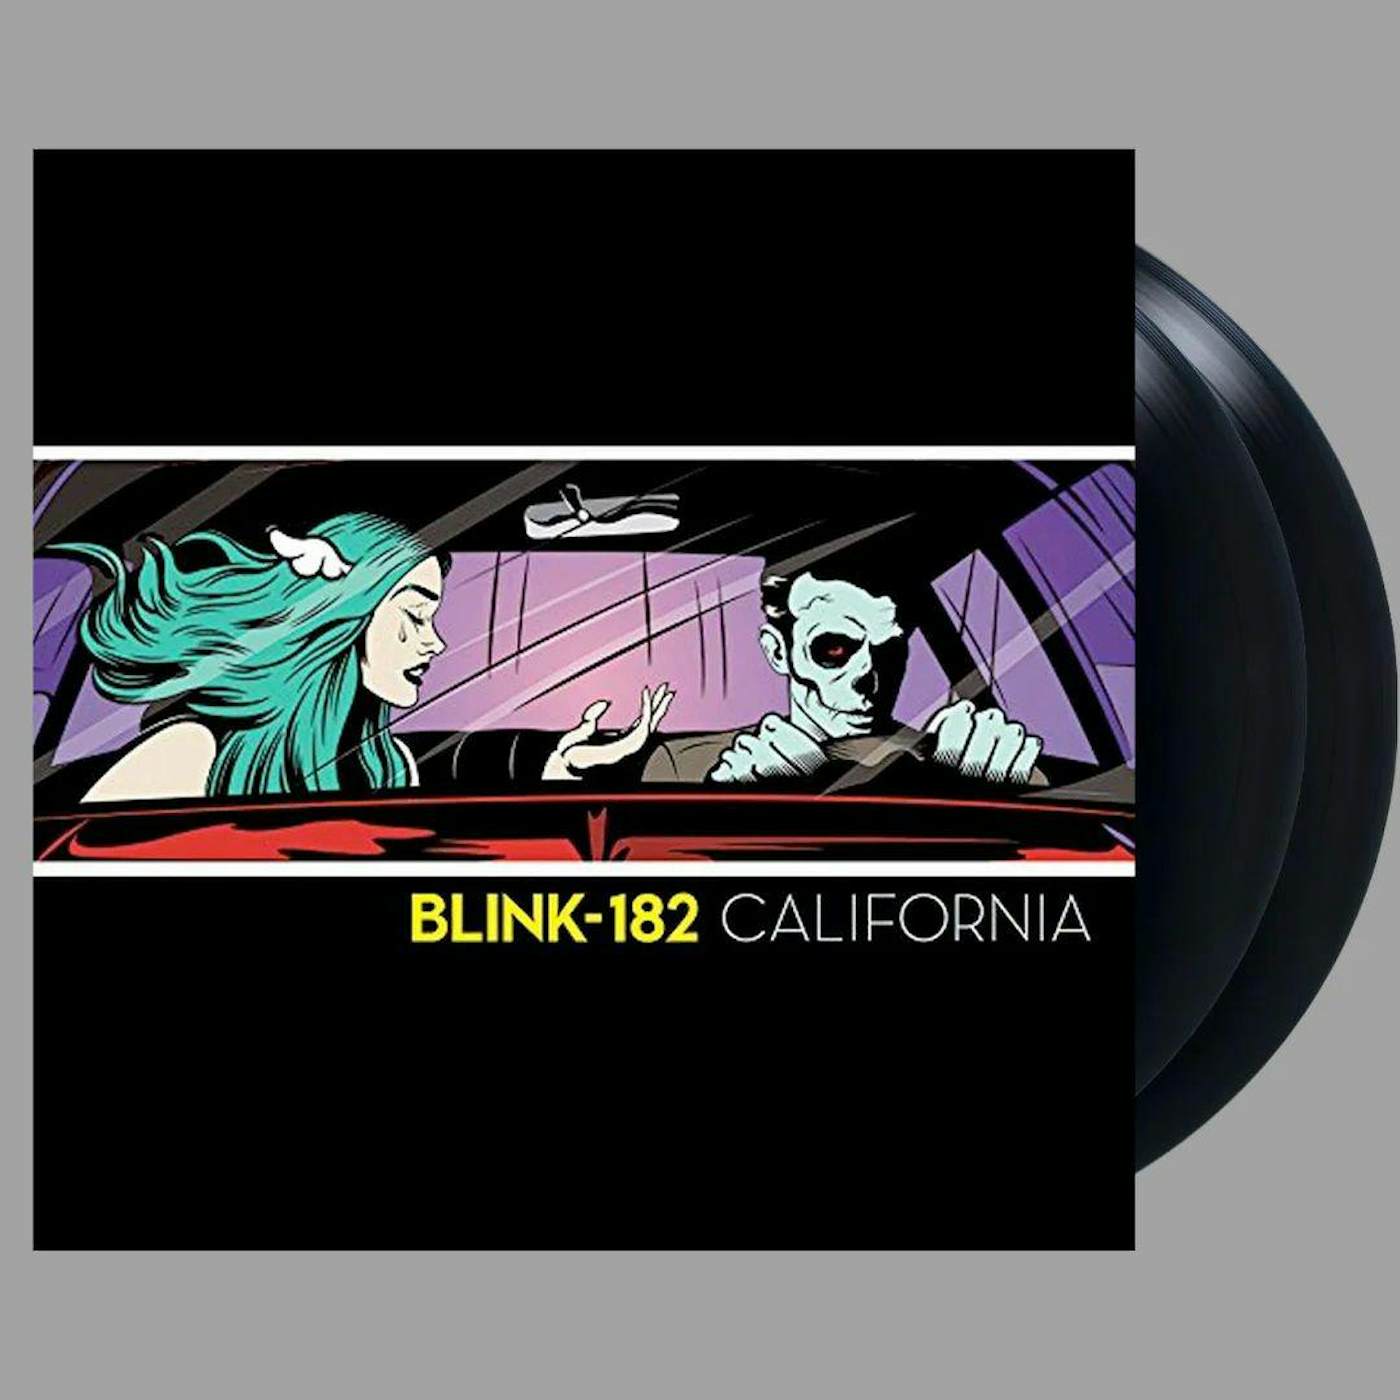 Blink-182 albums – ranked and rated in order of greatness